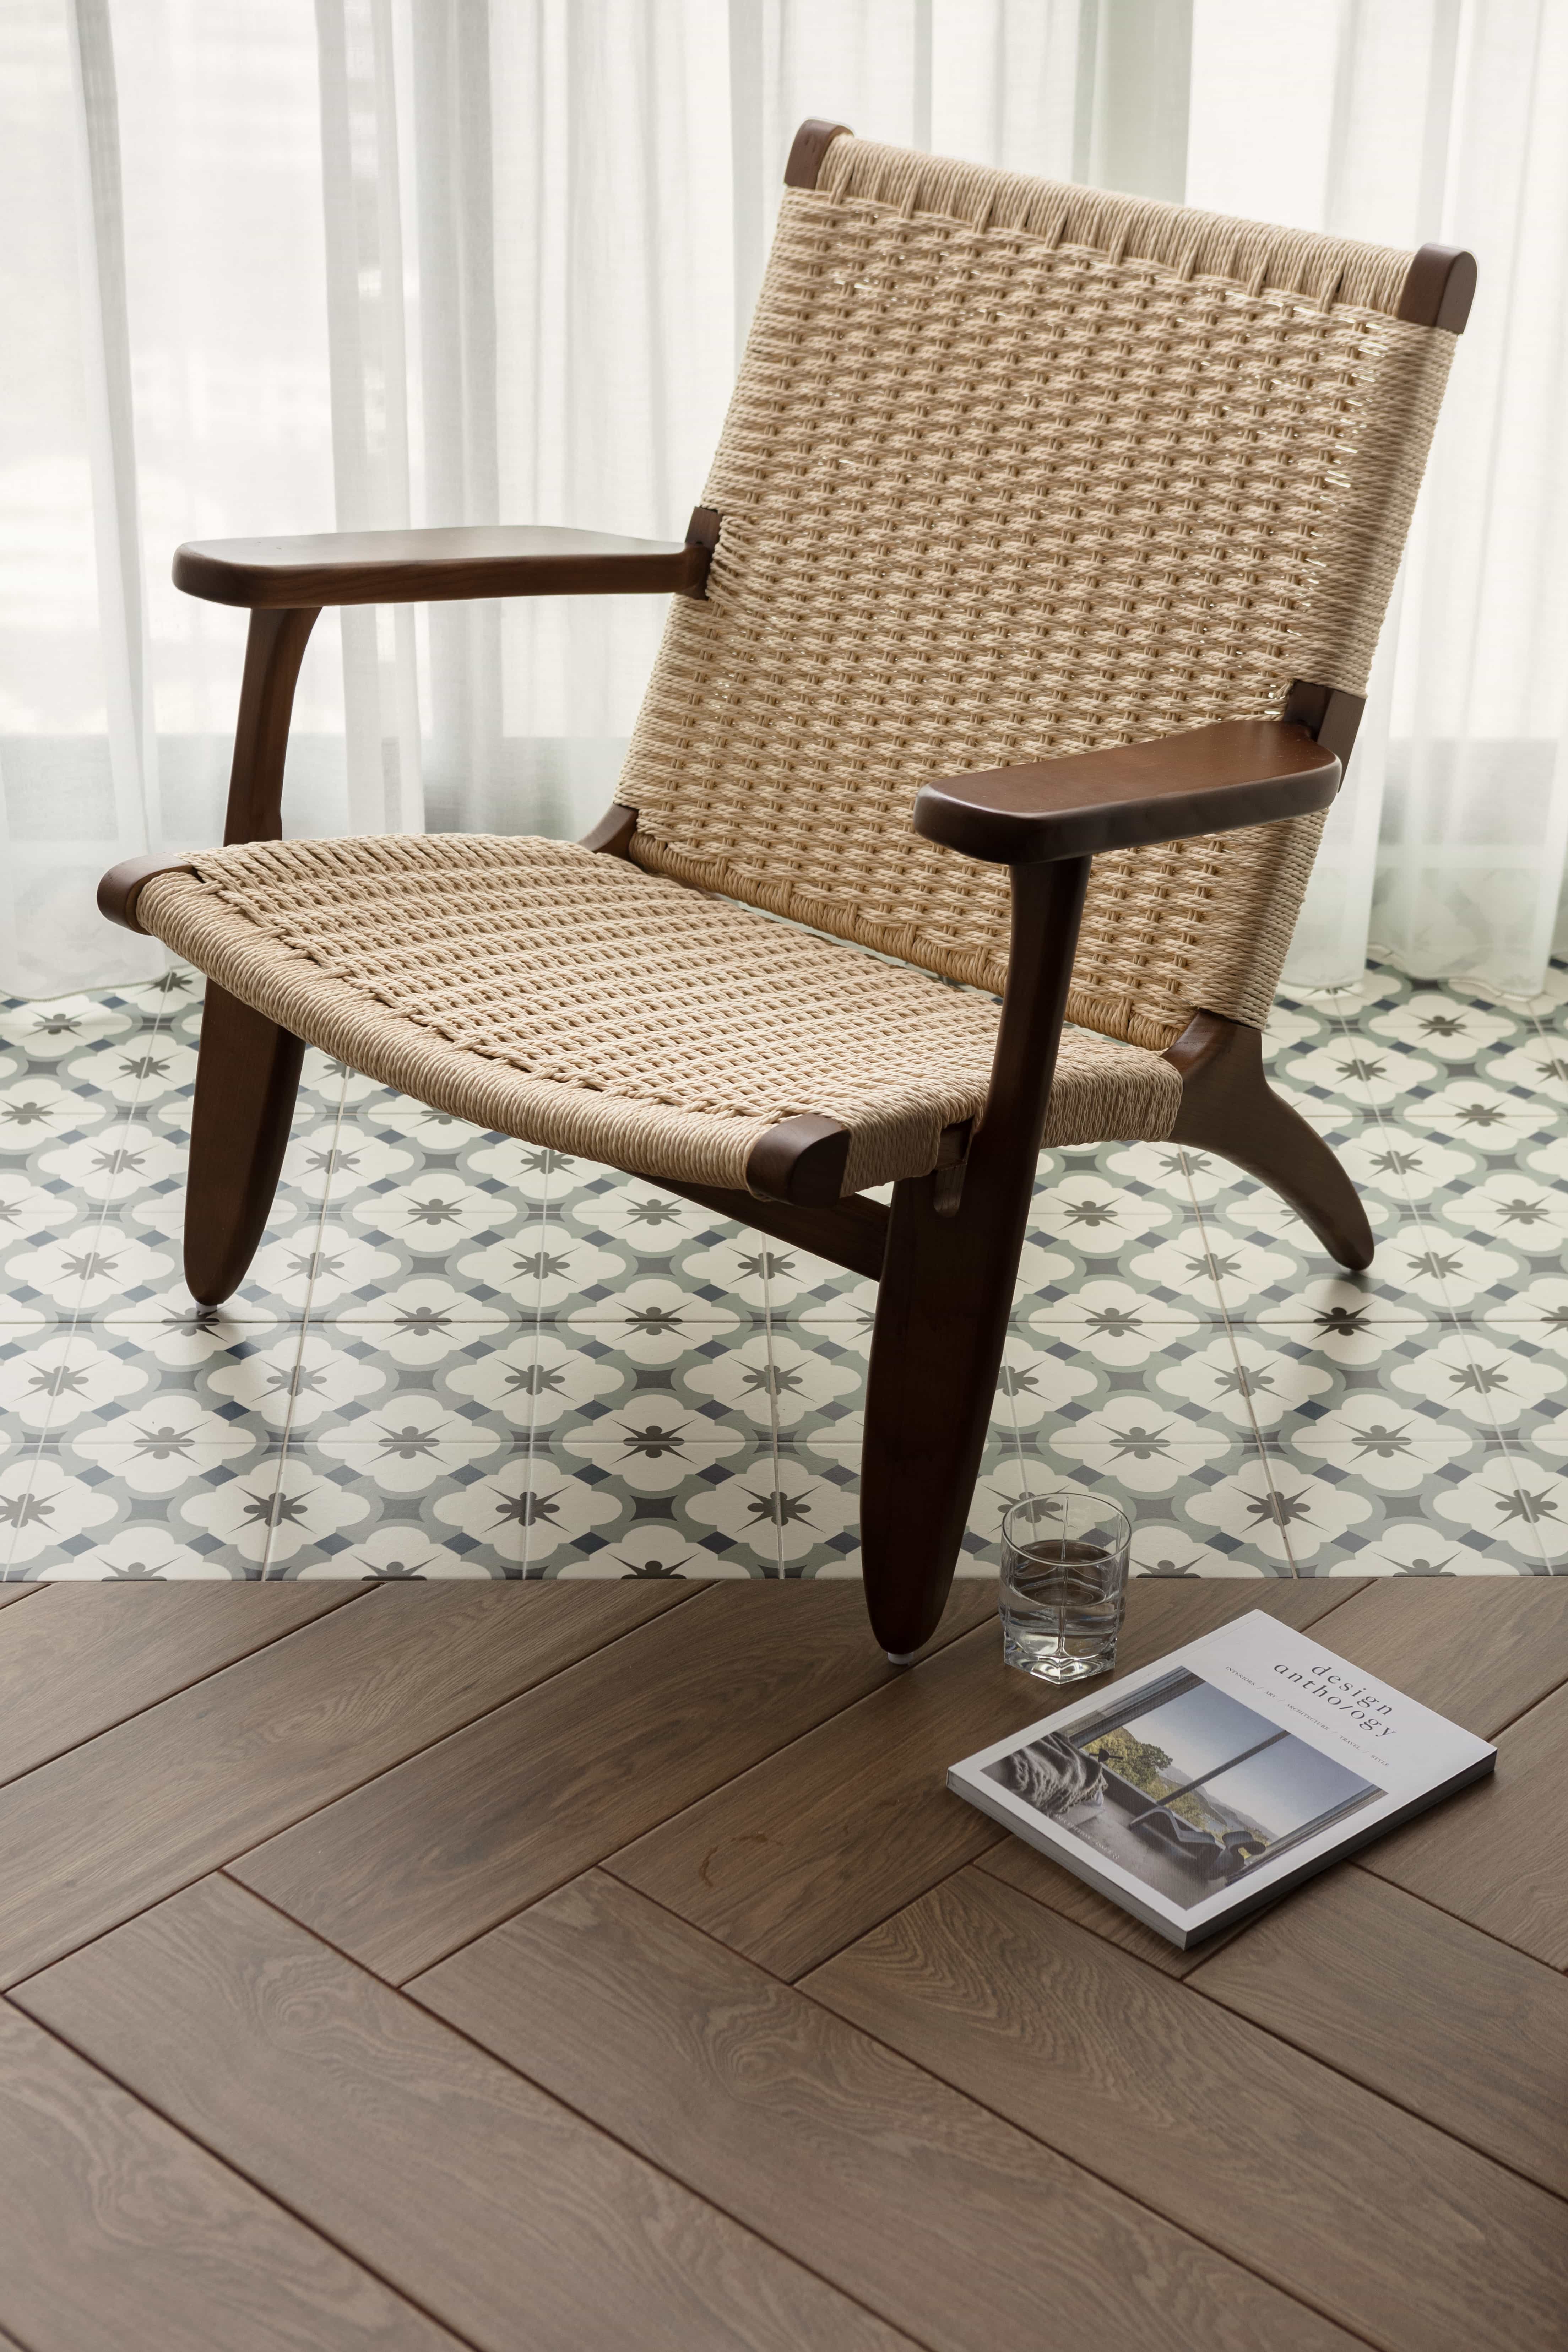 Woven chair with wooden frame on patterned floor tiles next to a magazine and glass of water.